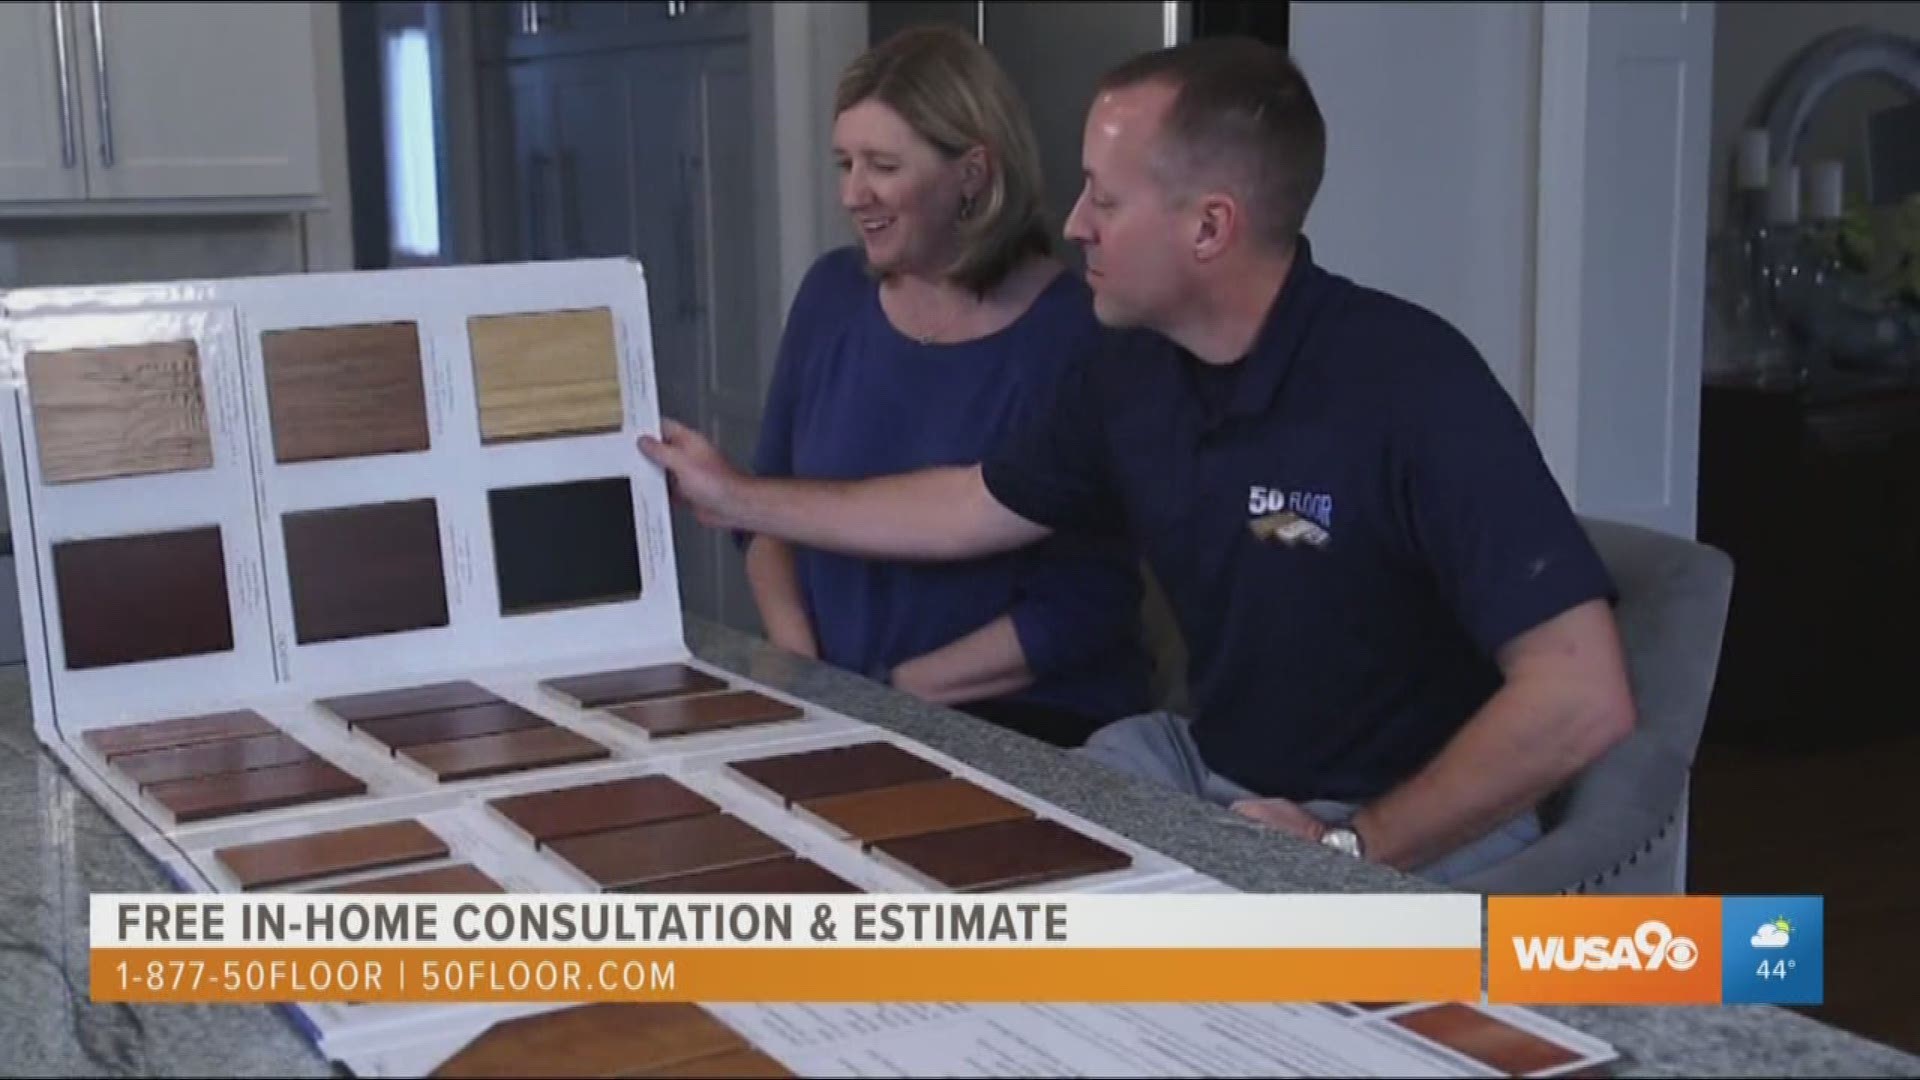 50 Floor is here to take out the pain of installing new floors in your home. This segment was sponsored by 50 Floor.